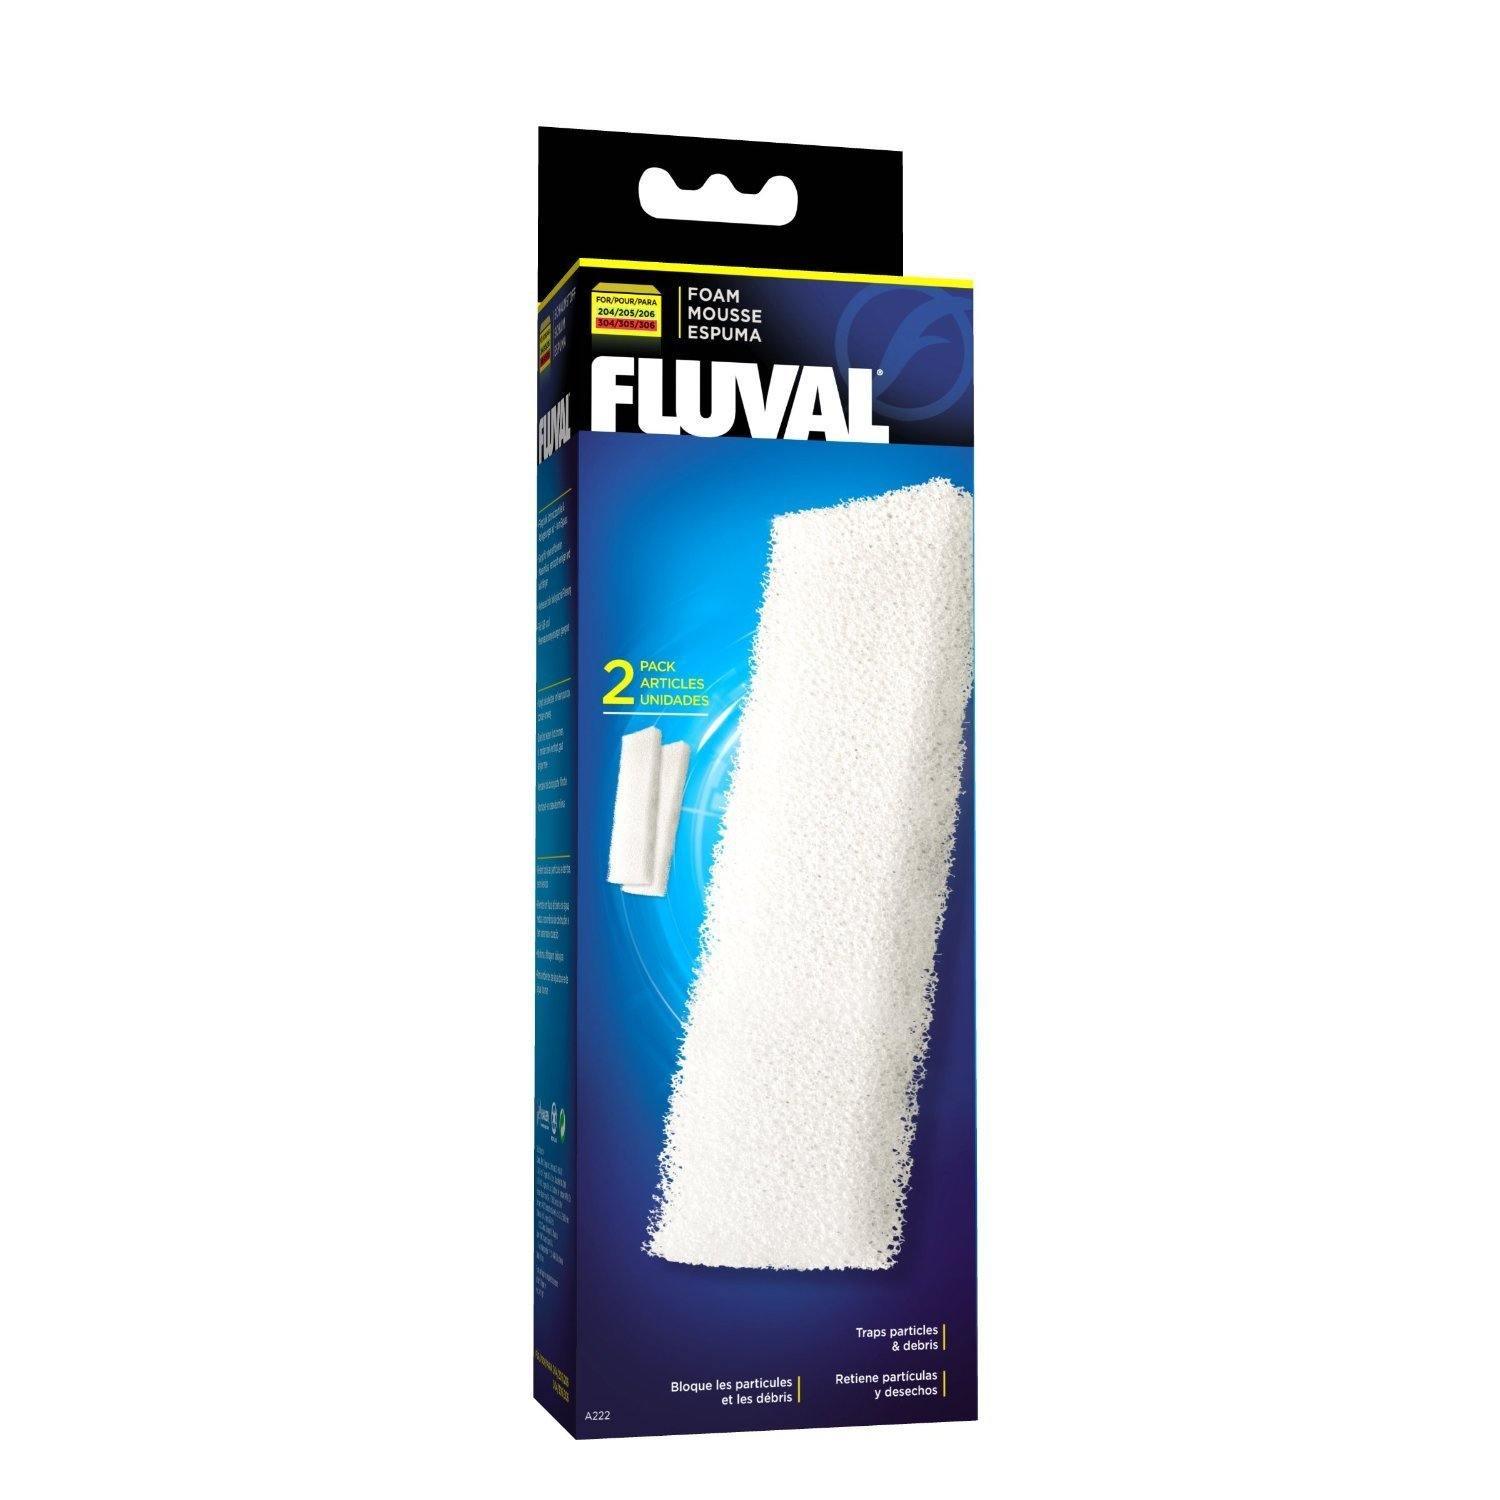 Fluval Canister Filter 206/306 Foam Filter 2 Pack (Also suits Fluval 04 and 05 Models) - Amazing Amazon